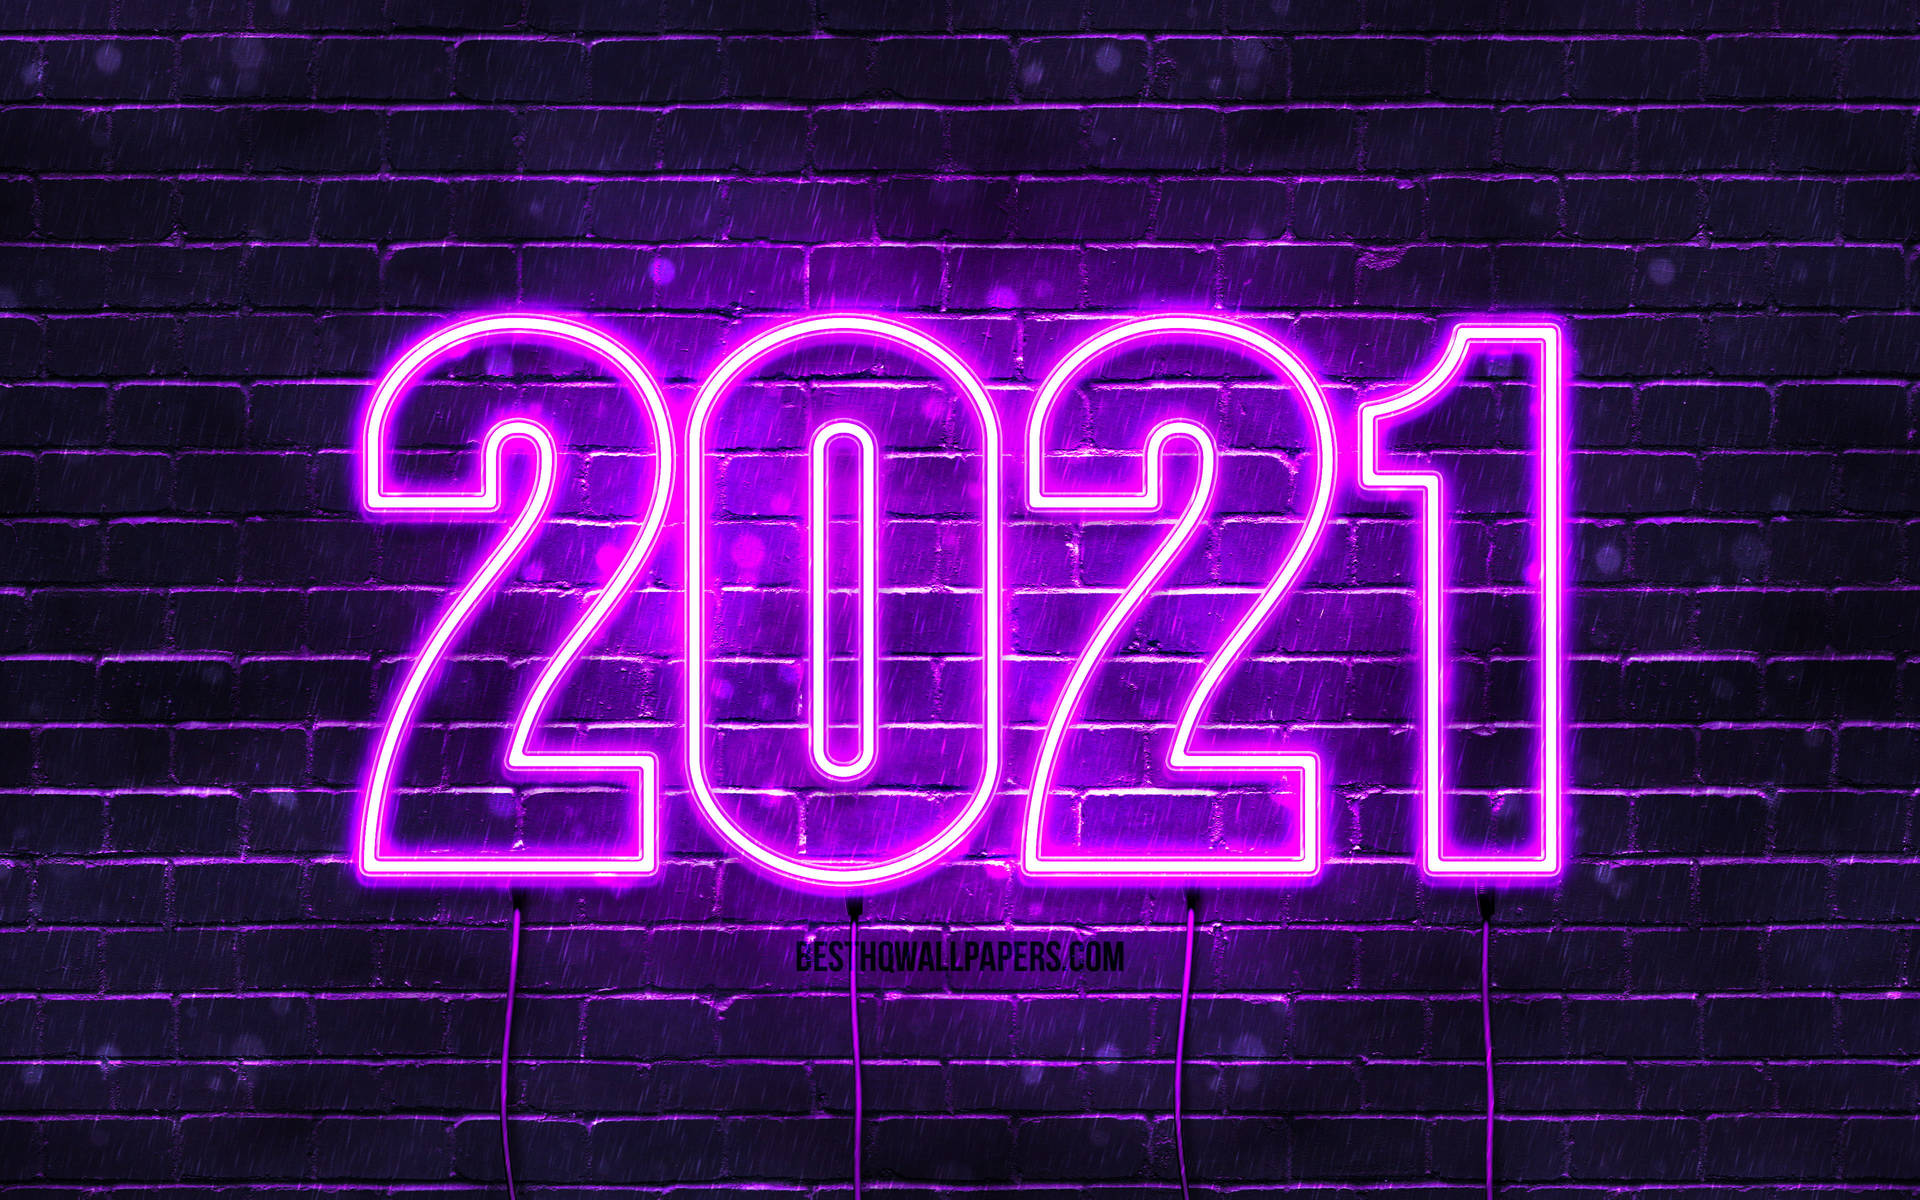 Happy New Year 2021 Backgrounds